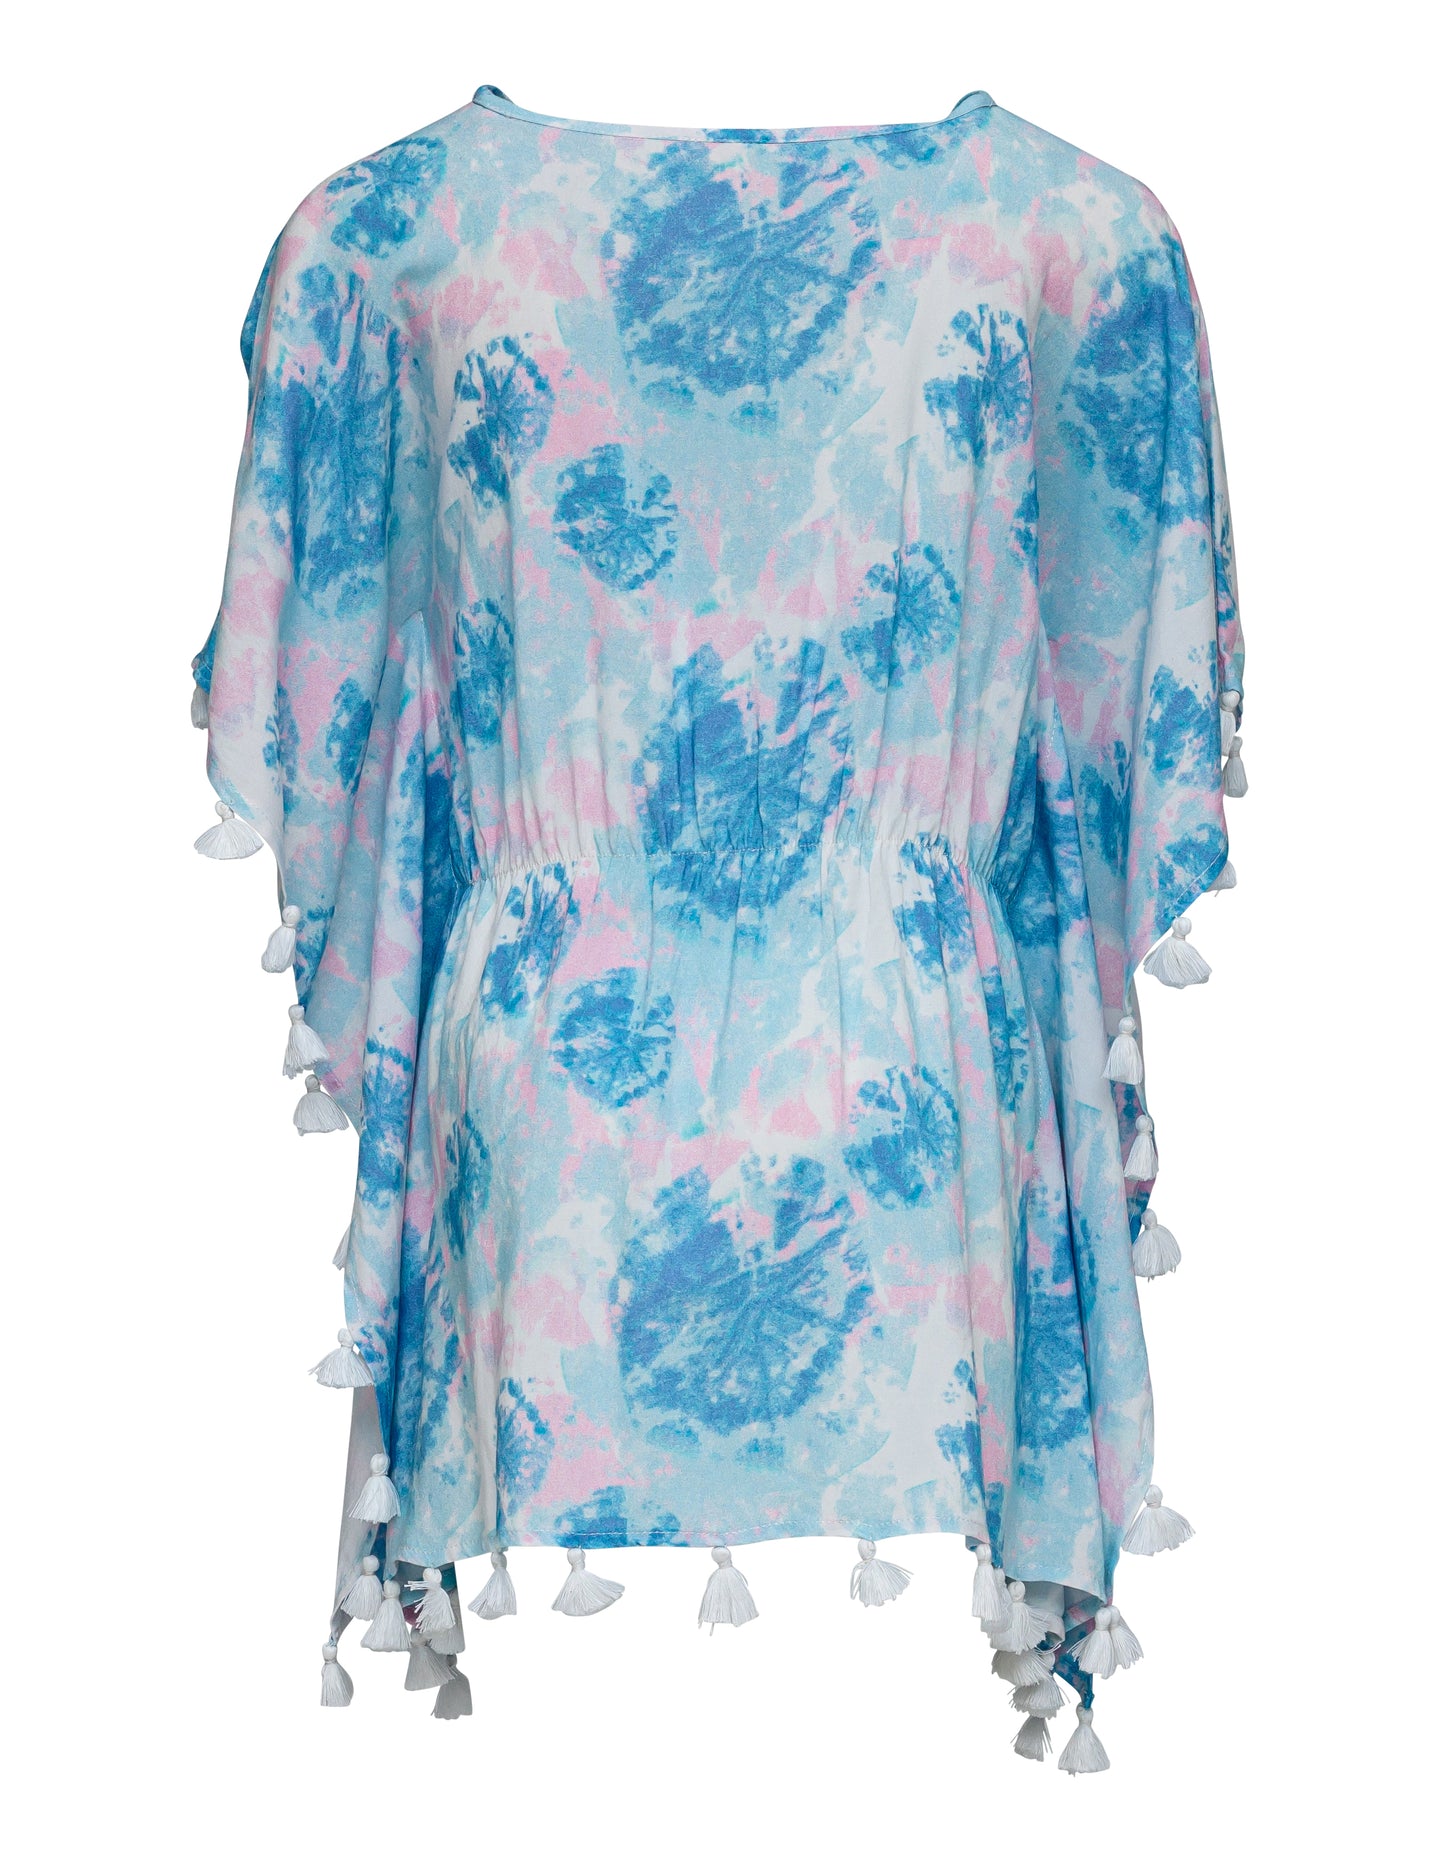 Sky Dye Scoop Swimsuit & Batwing Cover Up